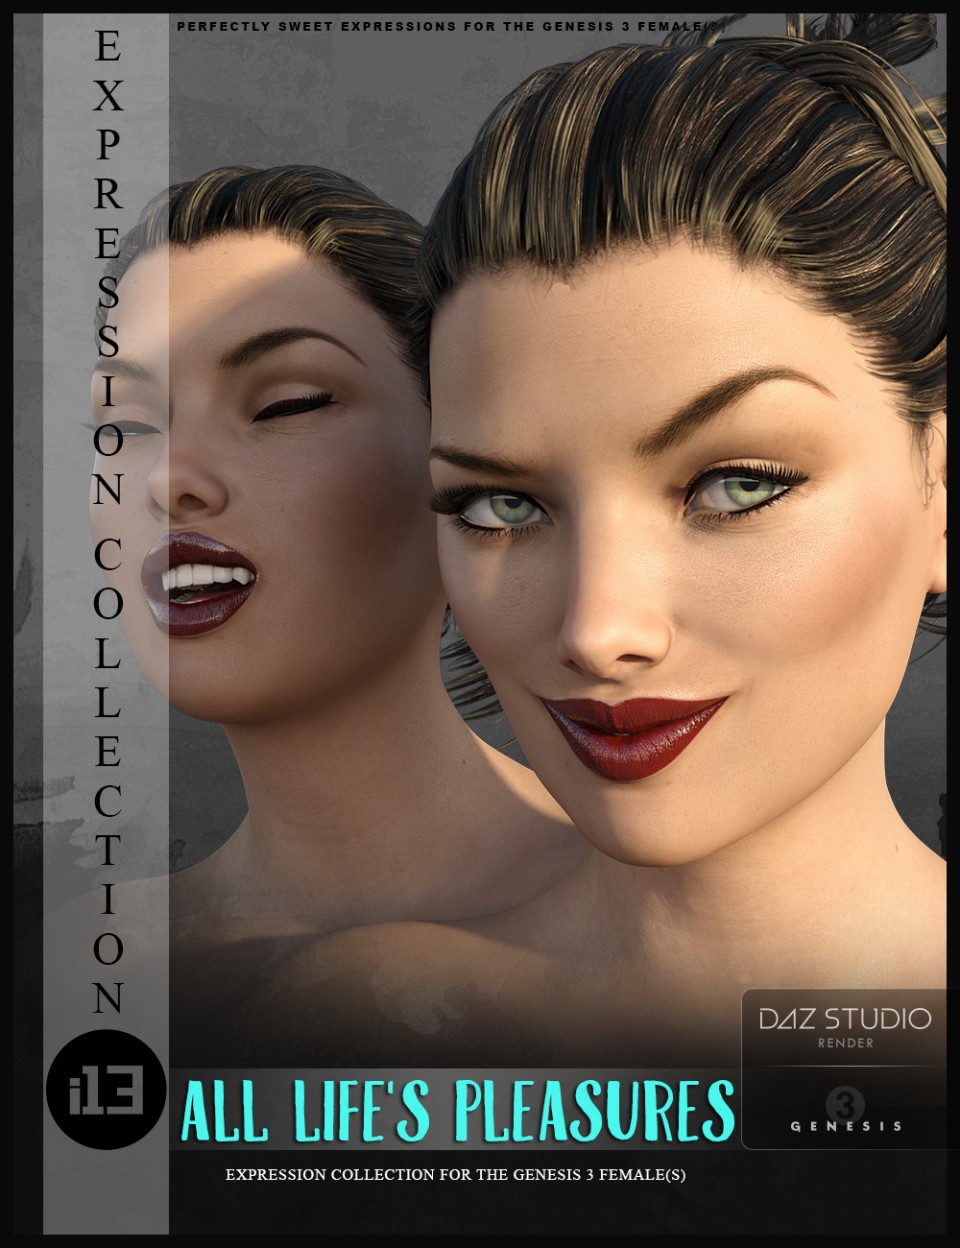 i13 All Life’s Pleasures Expressions for the Genesis 3 Female(s)_DAZ3DDL